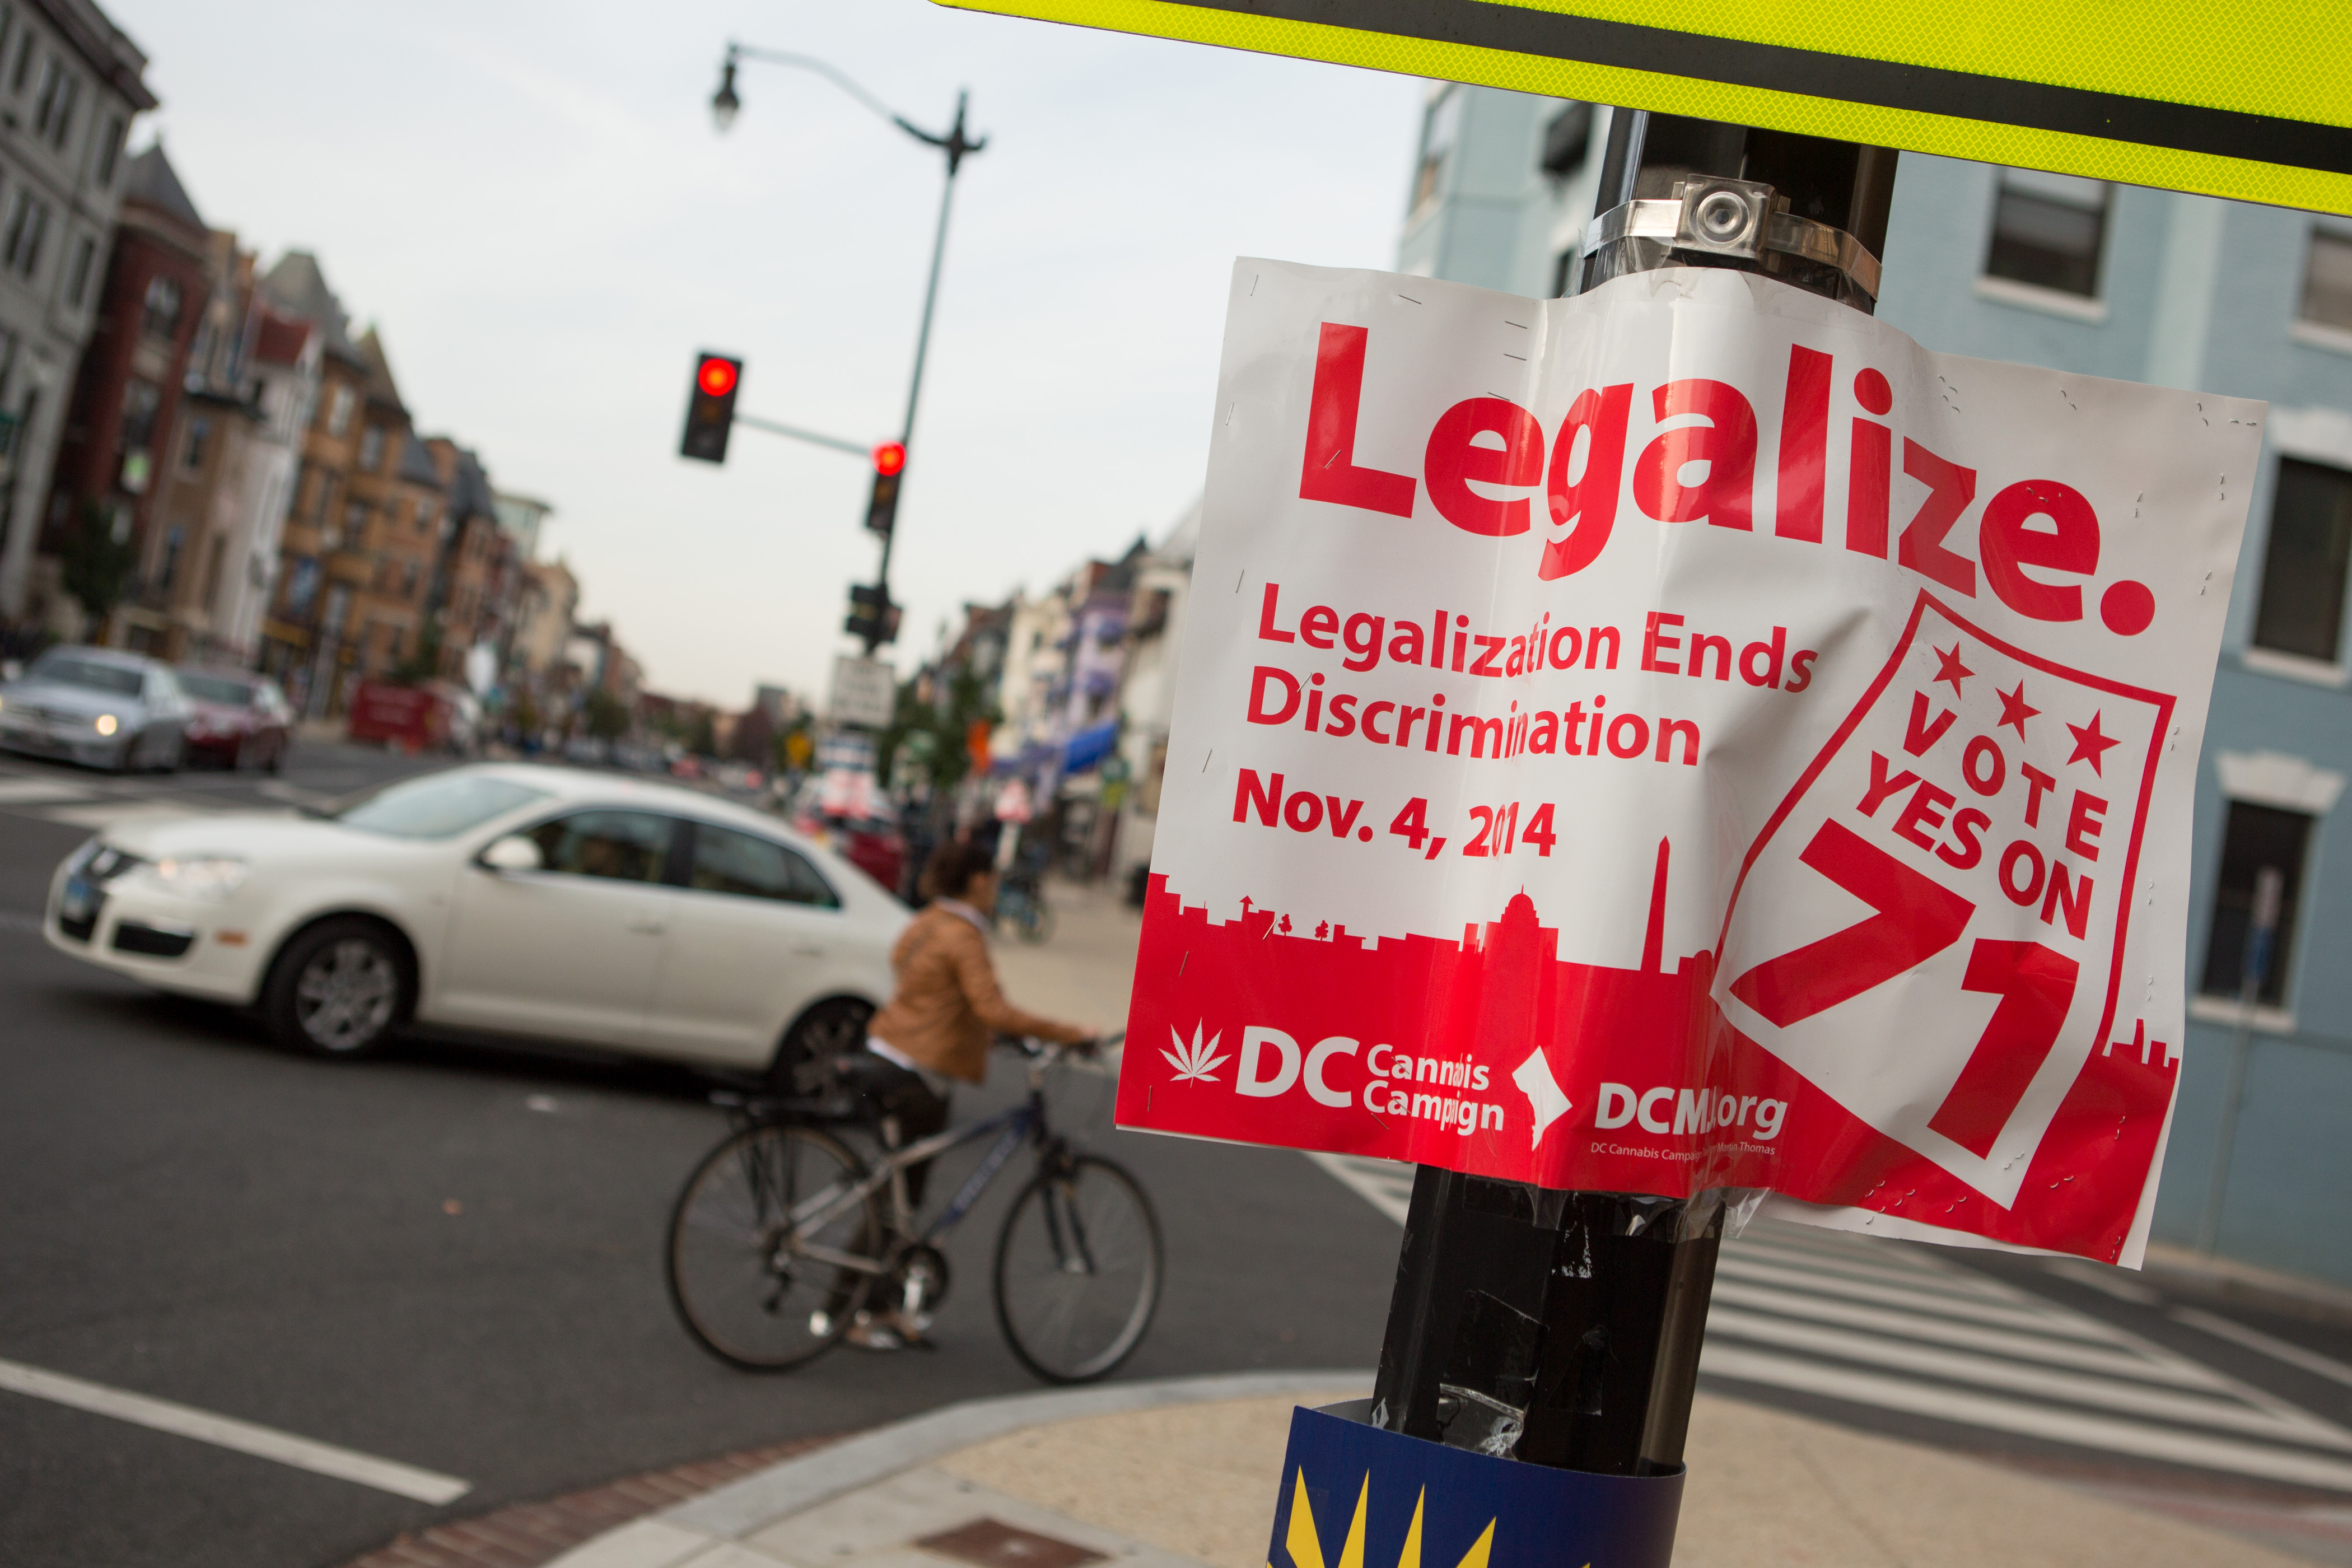 A sign promoting the DC Cannabis Campaign's initiative to legalize marijuana is displayed on a corner in the Adams Morgan neighborhood on November 4, 2014 in NW Washington D.C. (Allison Shelley&mdash;Getty Images)